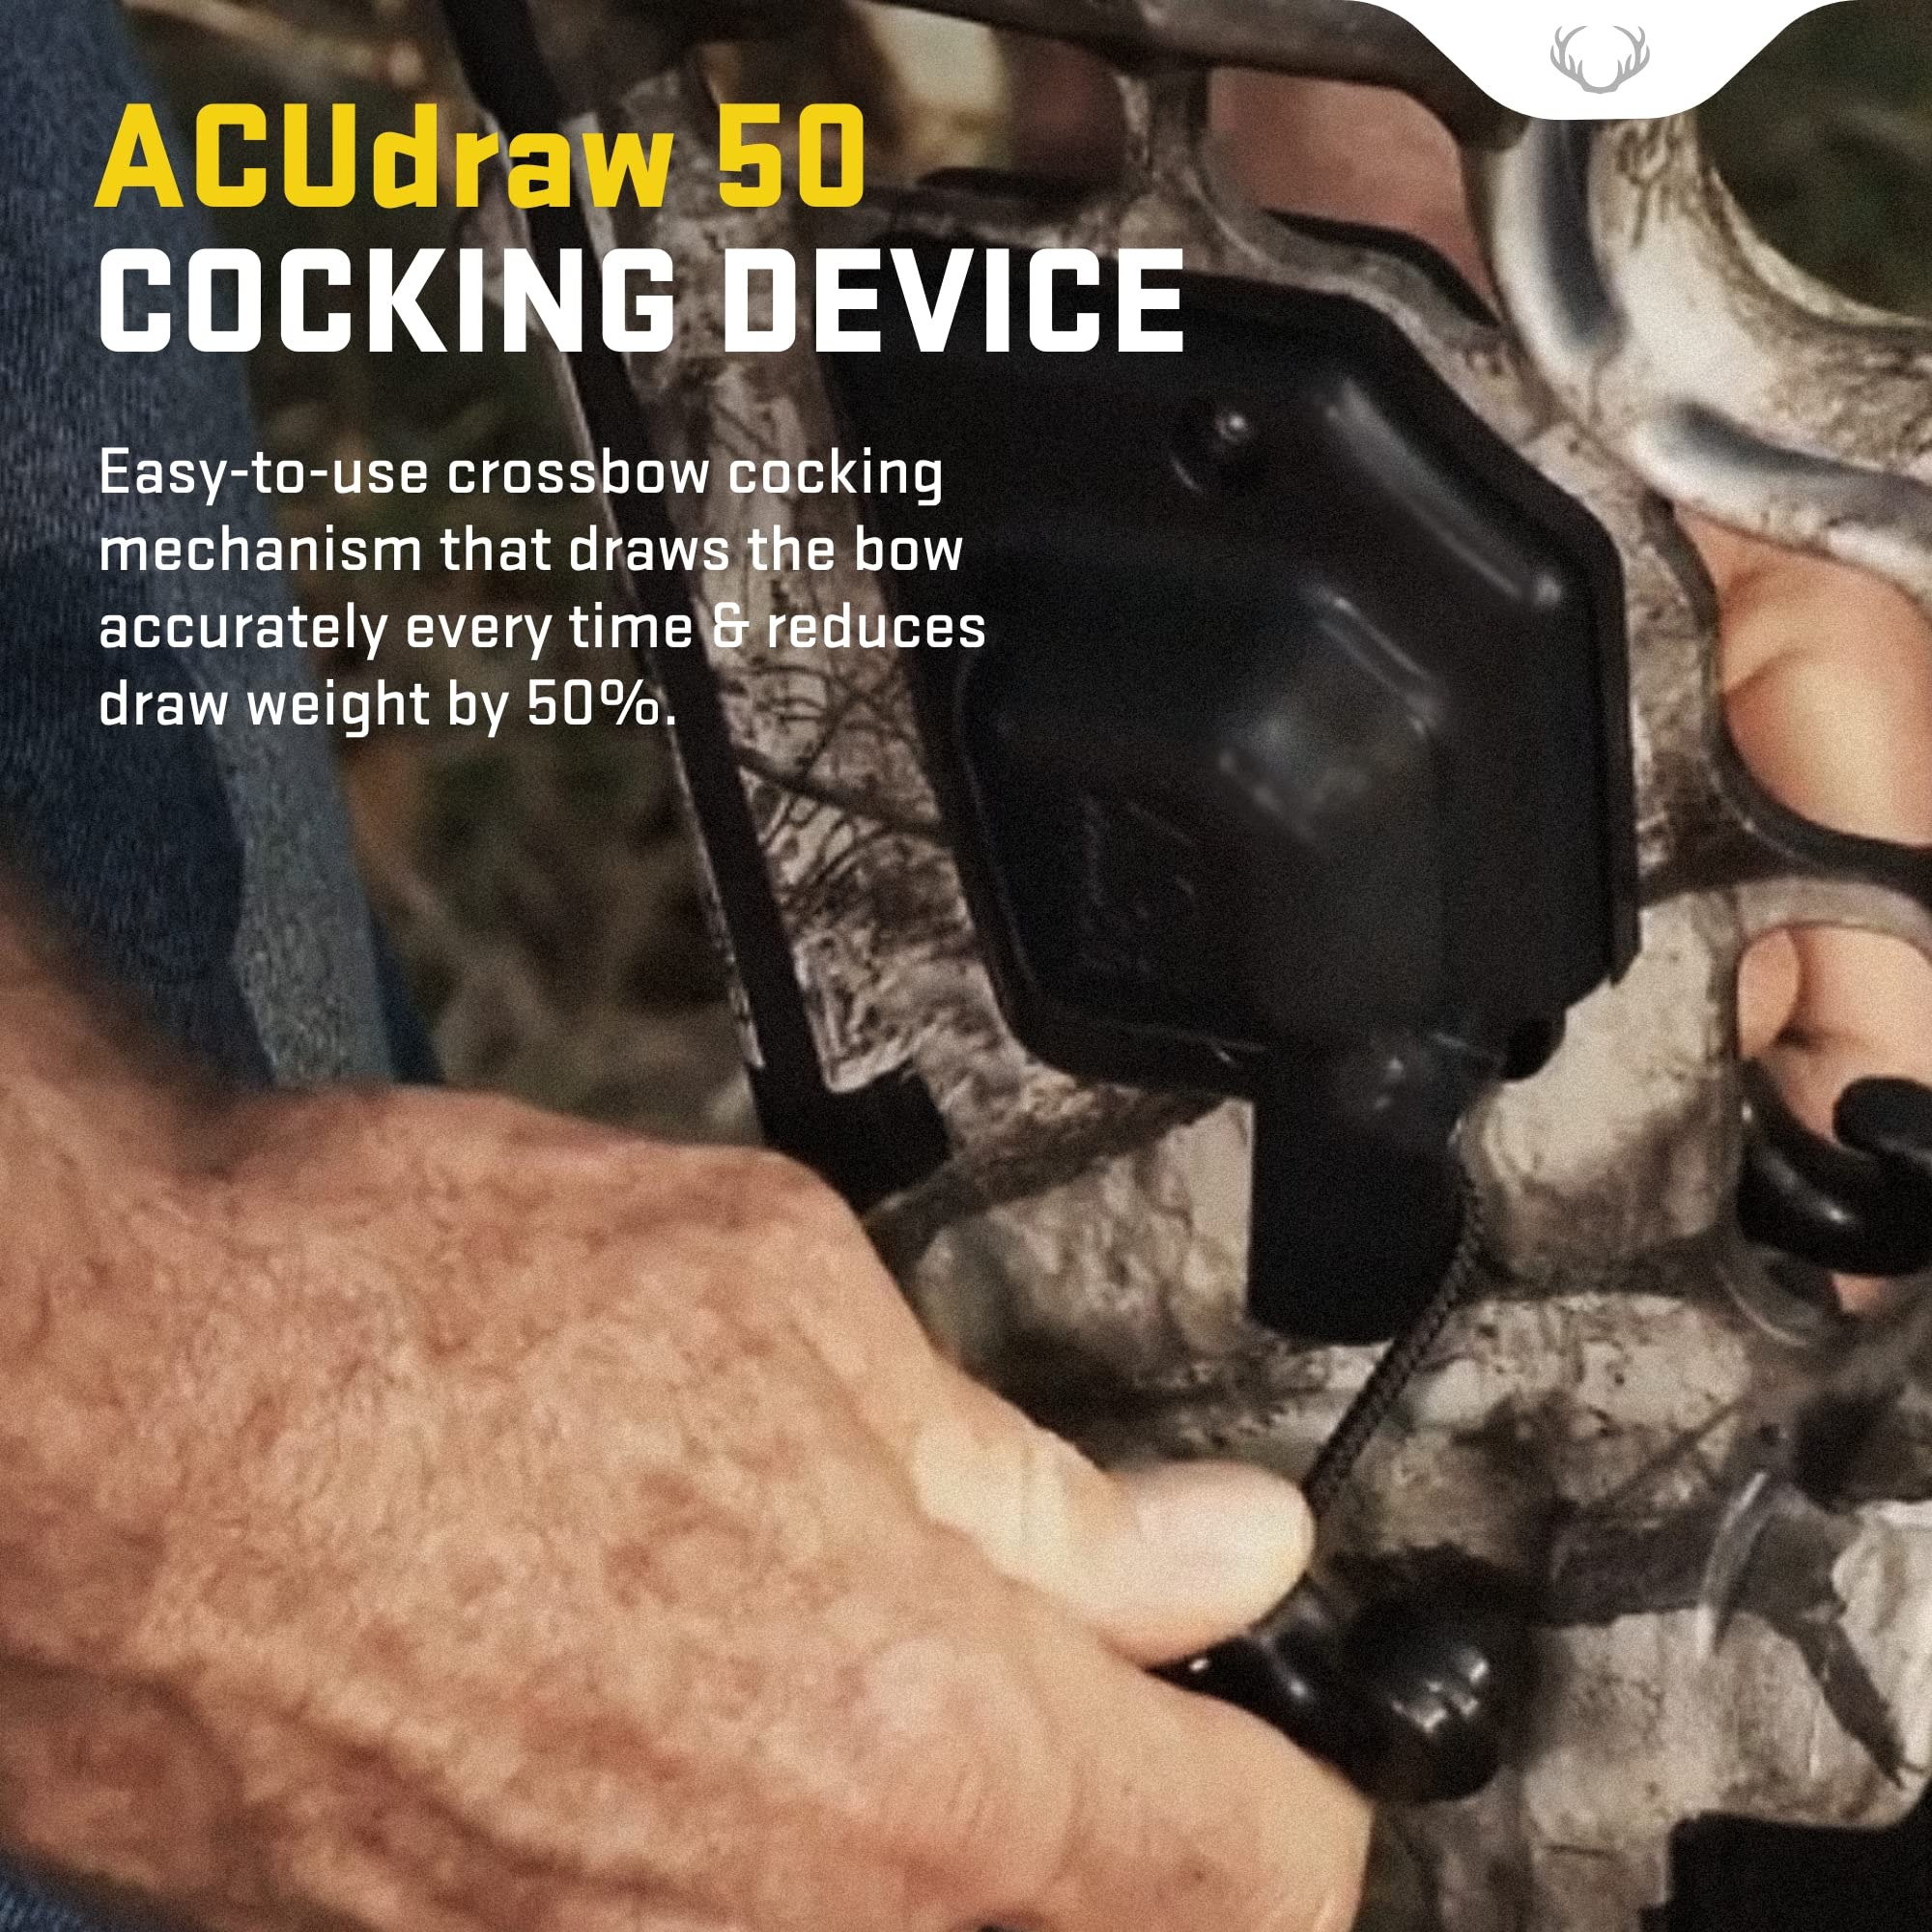 TenPoint ACUdraw 50 Cocking Device - Reduces Draw Weight by 50% - Built-in Cocking Device